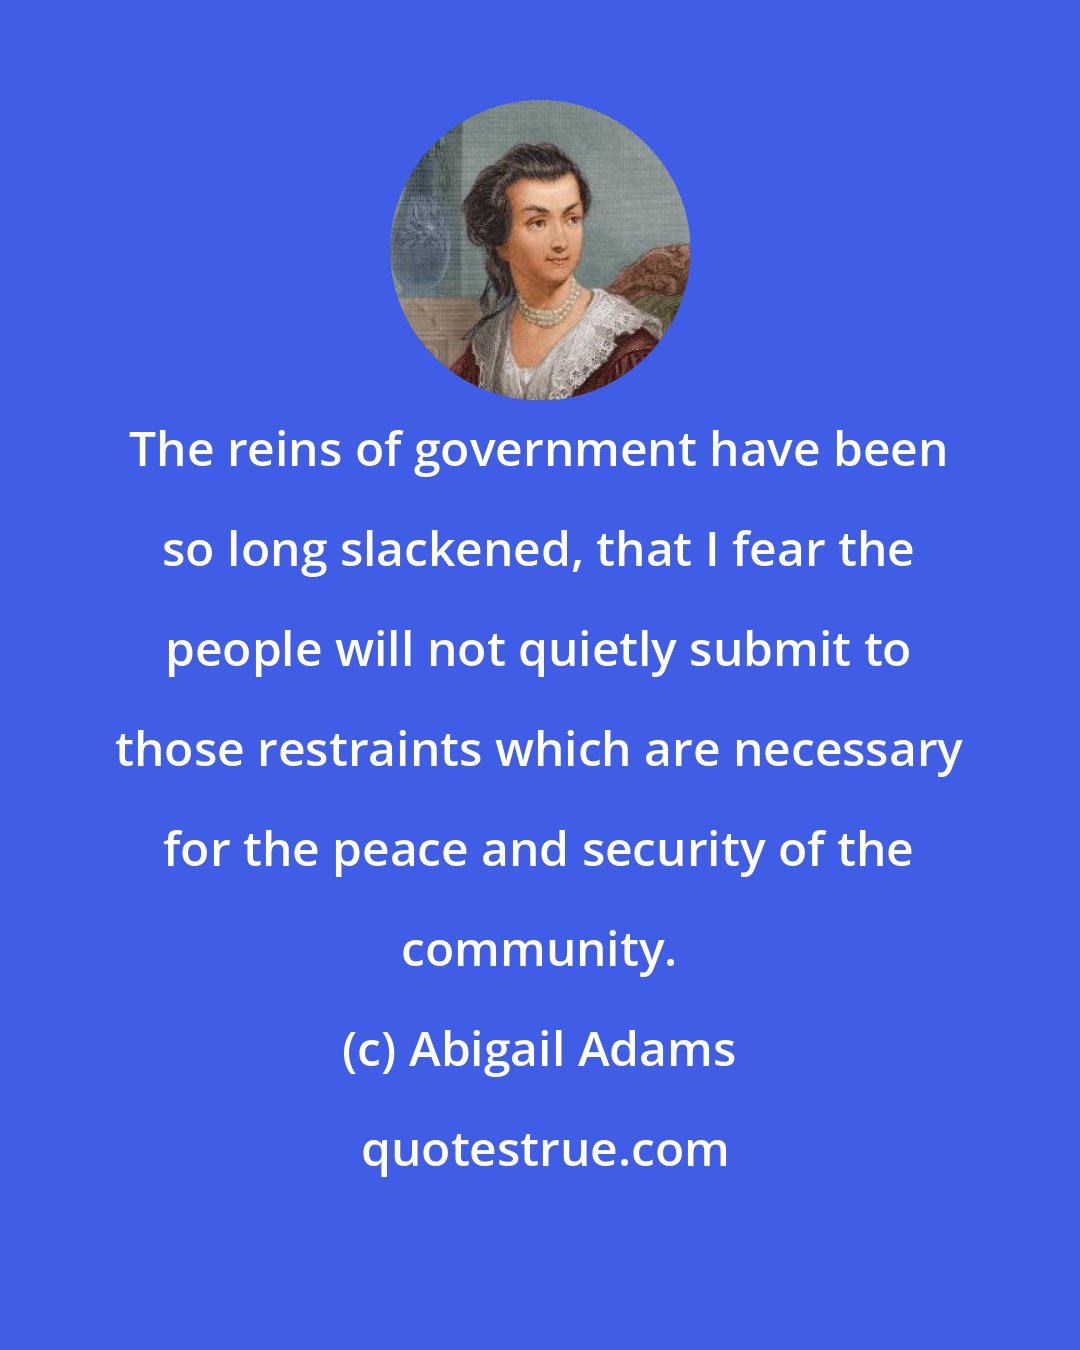 Abigail Adams: The reins of government have been so long slackened, that I fear the people will not quietly submit to those restraints which are necessary for the peace and security of the community.